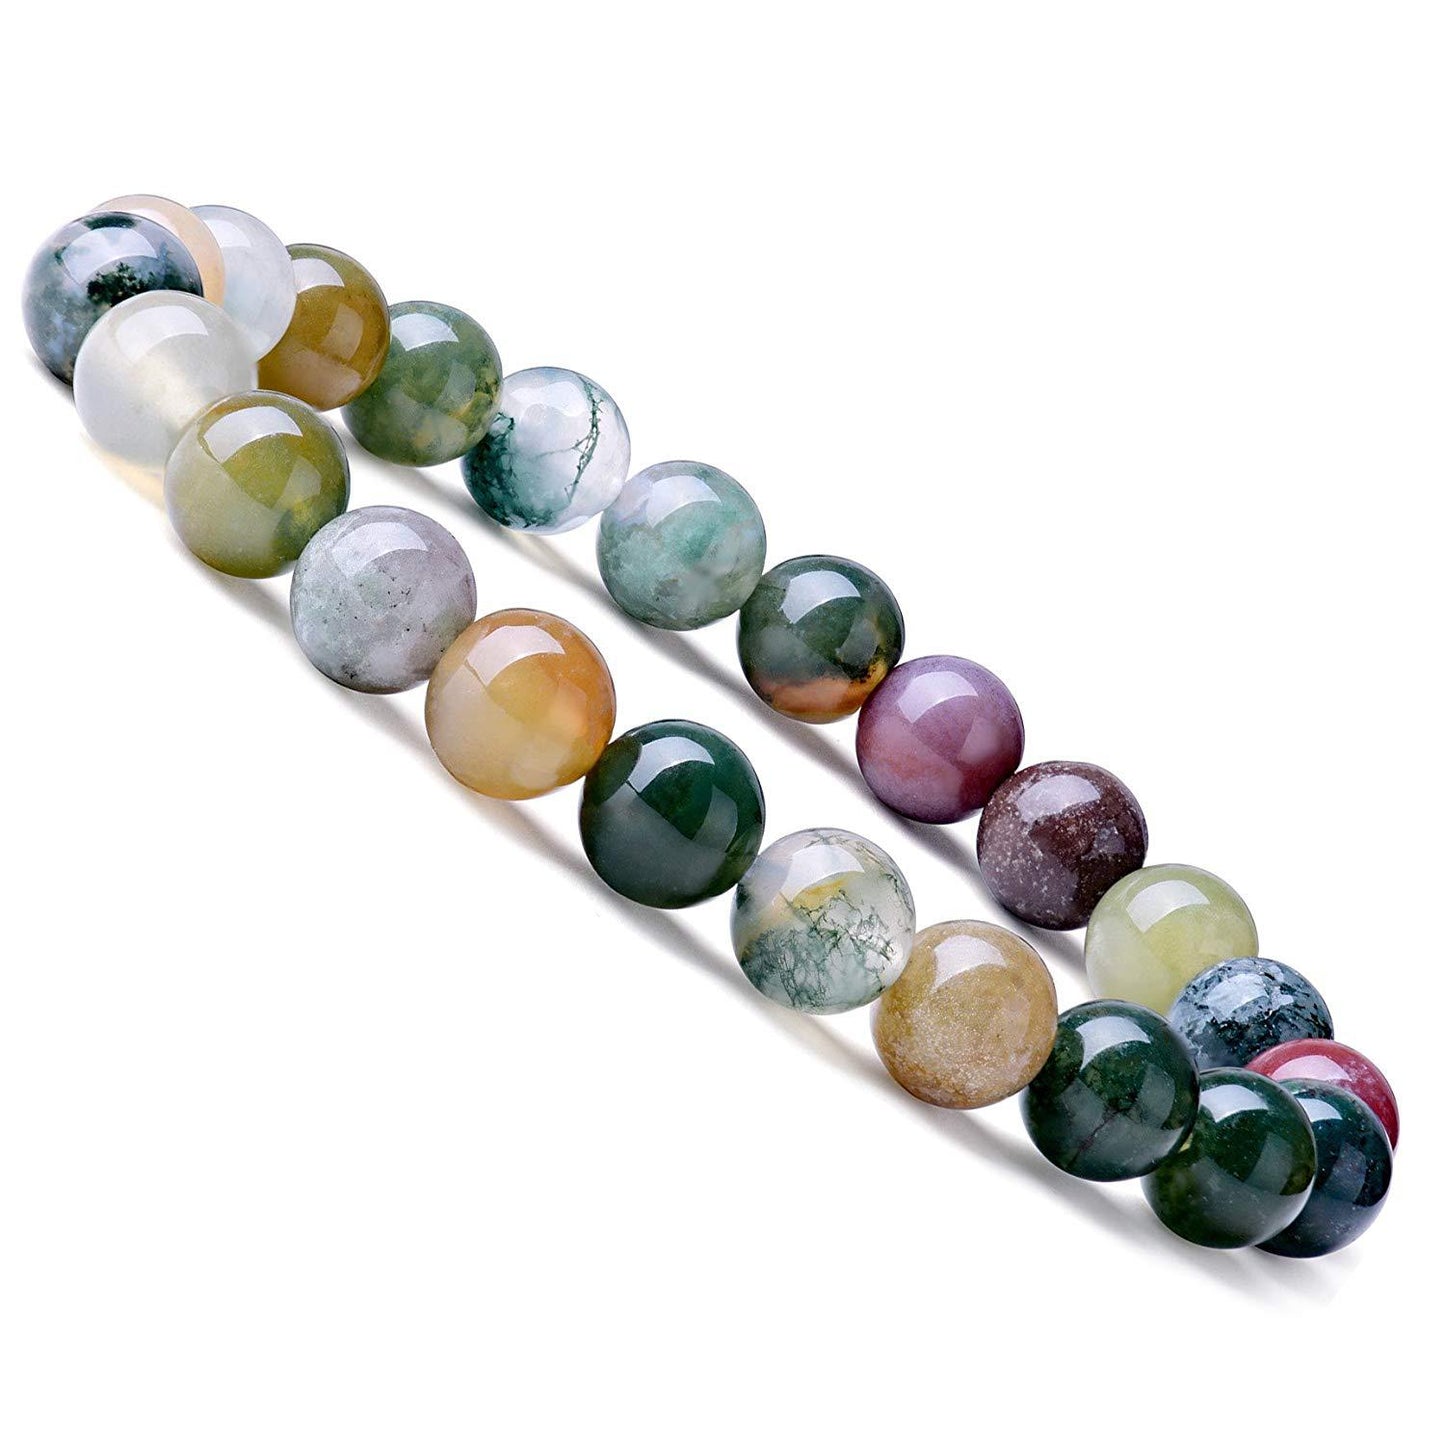 Mixed Agate 8mm Bead Bracelet 7 Inch